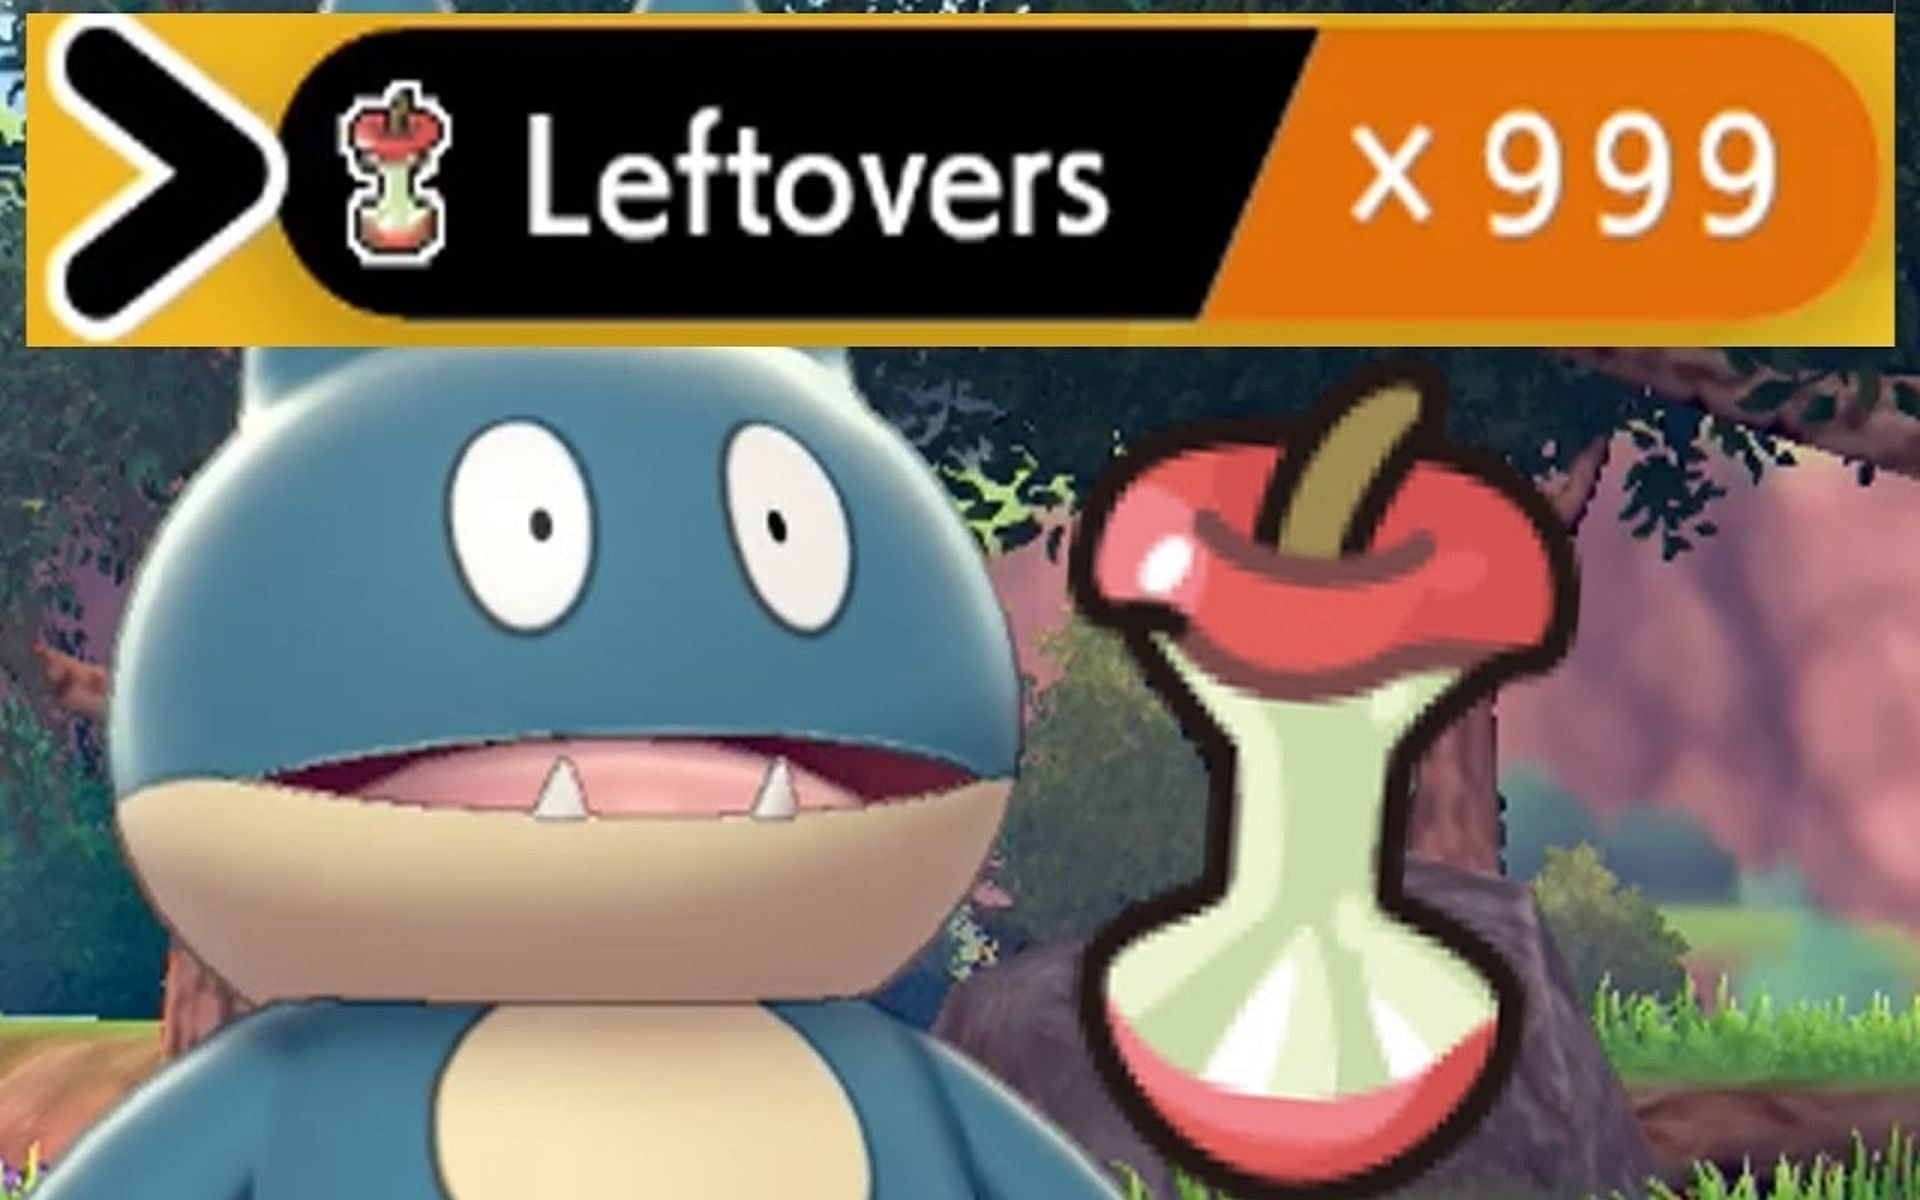 Leftovers are much more useful in competitive Pokemon than they are in Pokemon Unite (Image via Pimpnite)